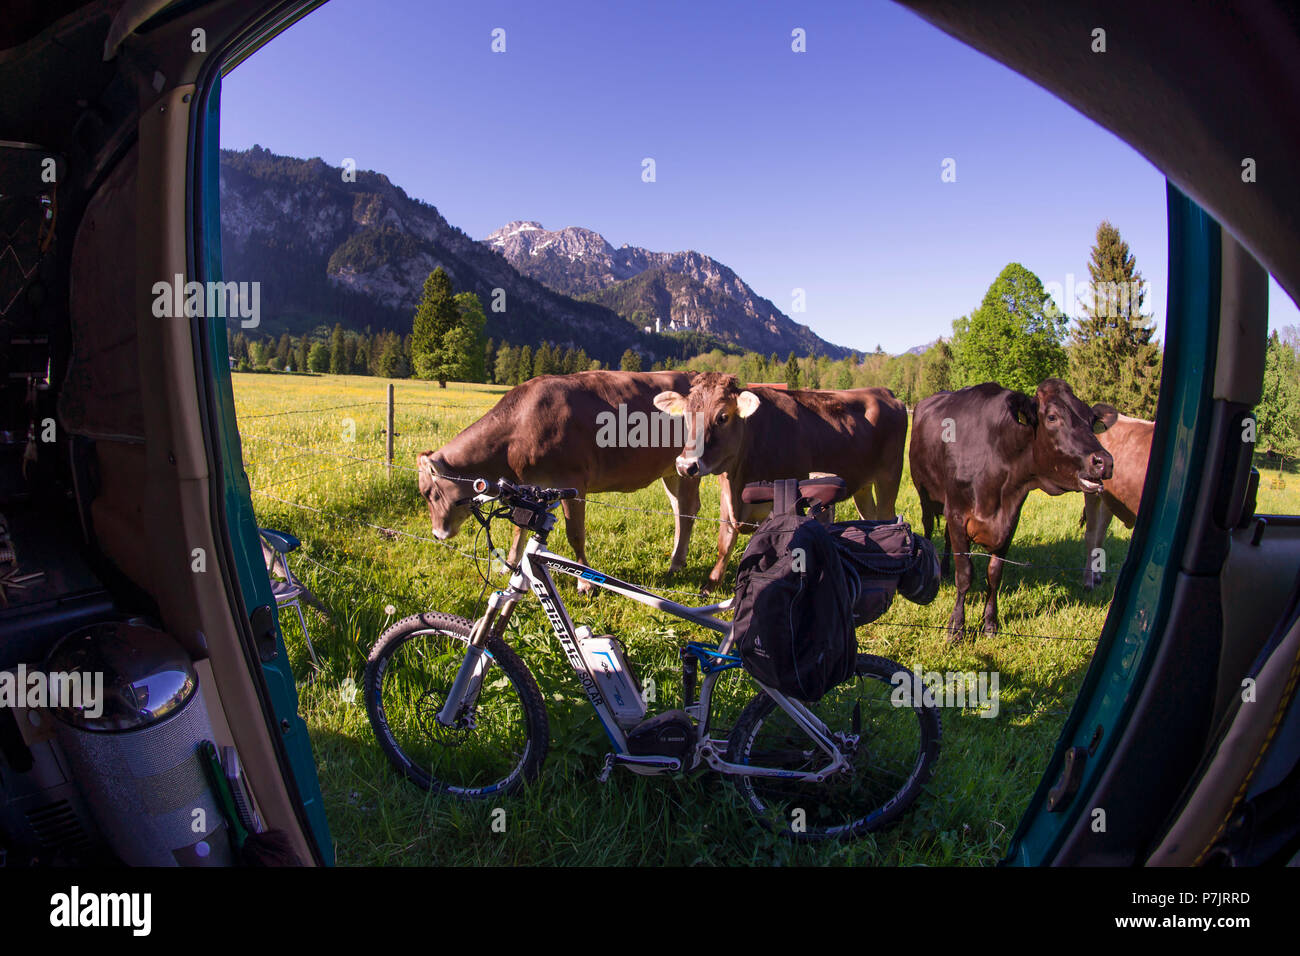 Solar vehicle, free camping in harmony with nature, view of e-bike and cows Stock Photo